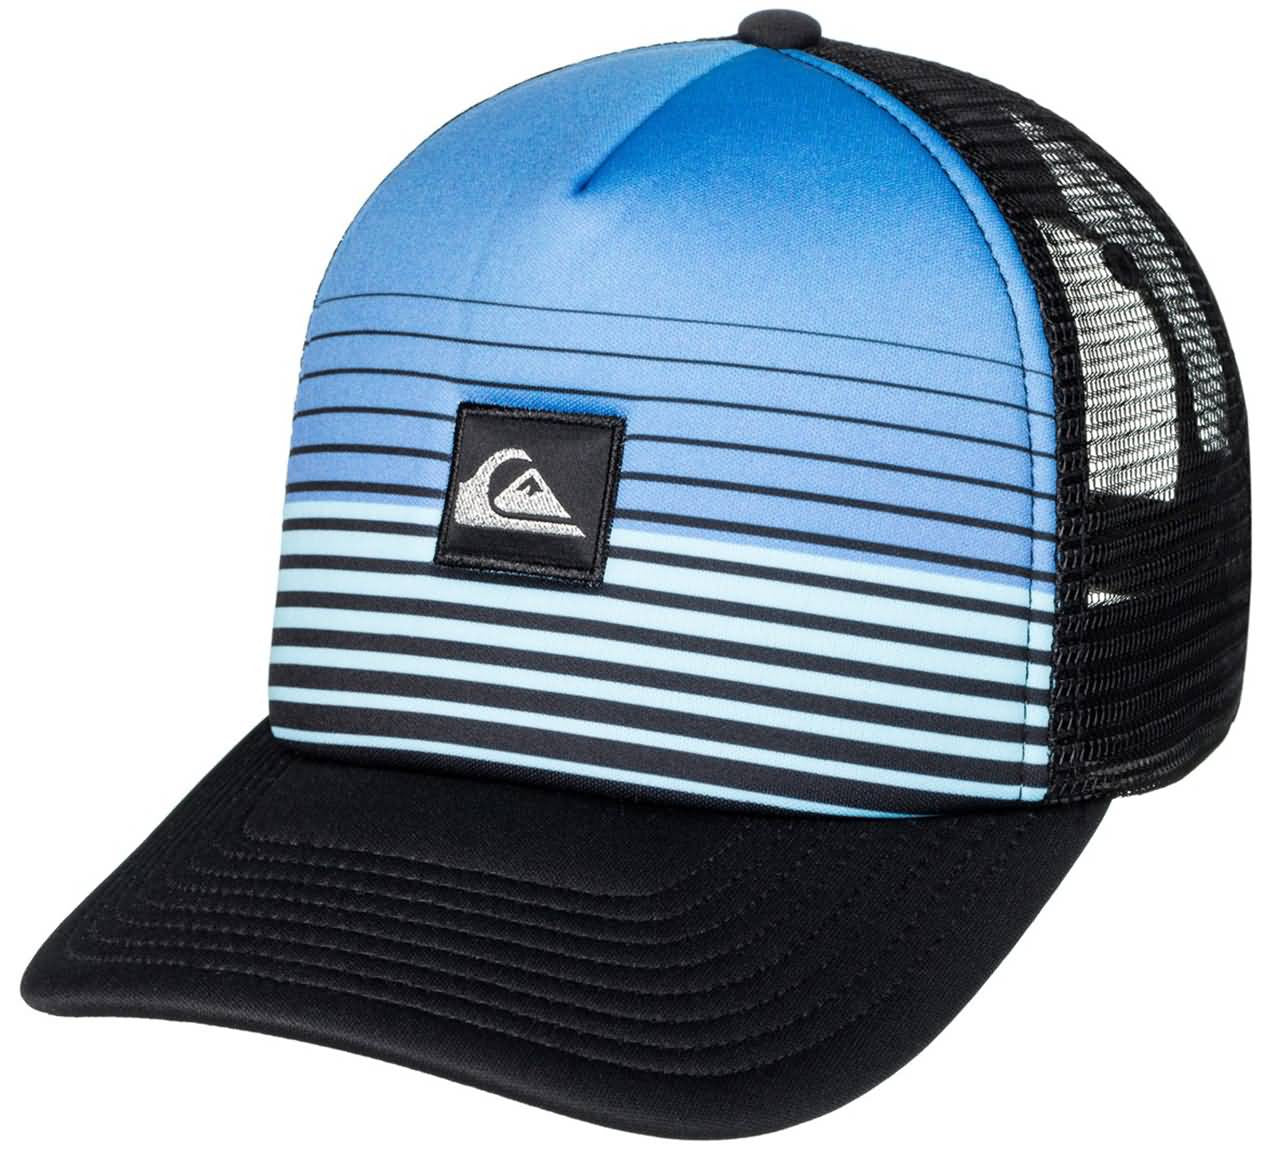 Quiksilver Surf Fall 2017 Headwear | Beach Lifestyle Hats Preview